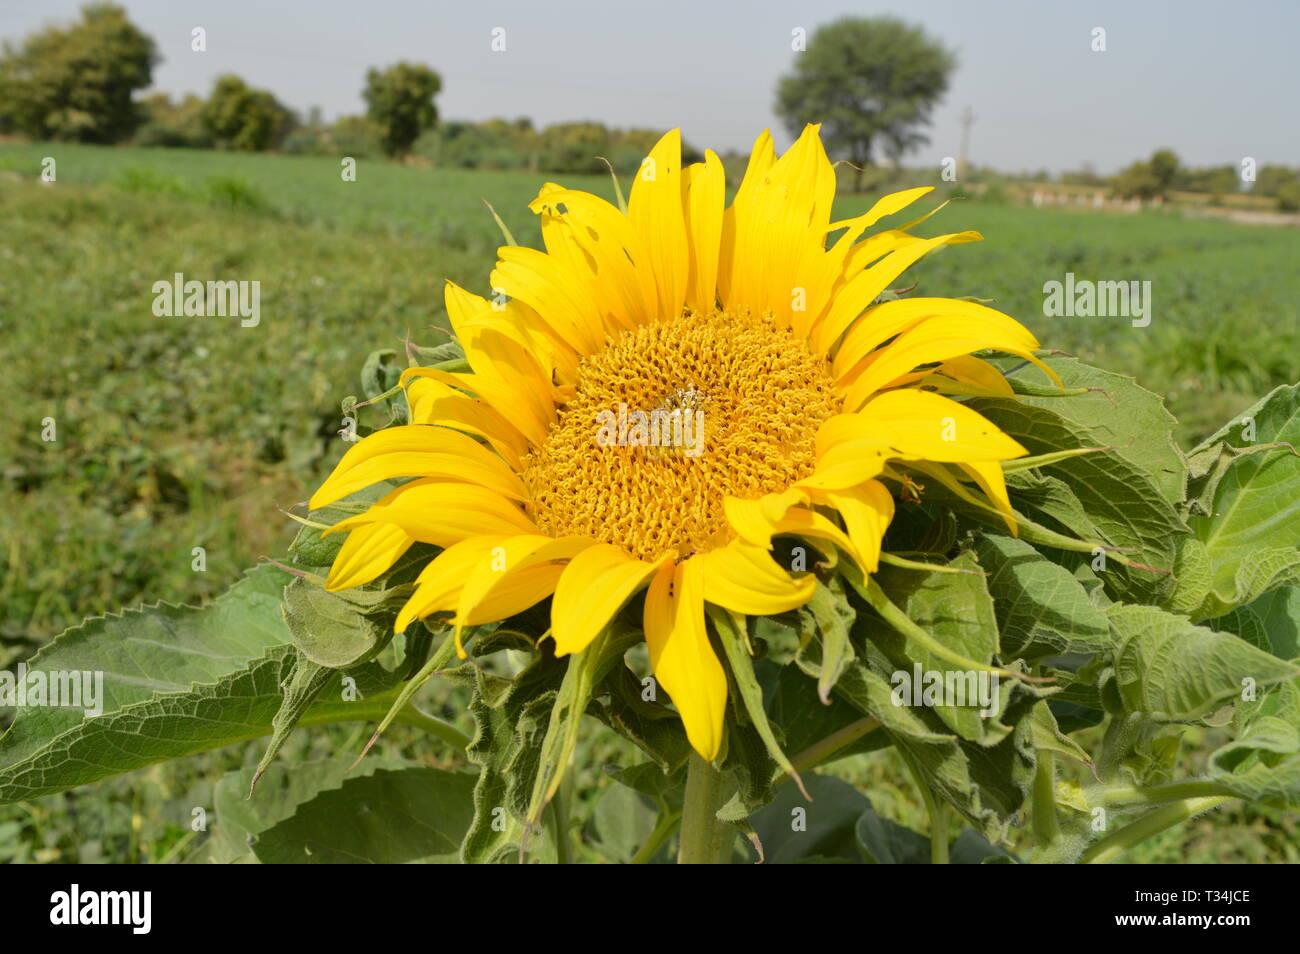 Sunflower with Green Leaf, Beautiful Yellow Sunflower India, Agricultural Field, Agriculture, Beauty In Nature, Botany, The common sunflower Stock Photo